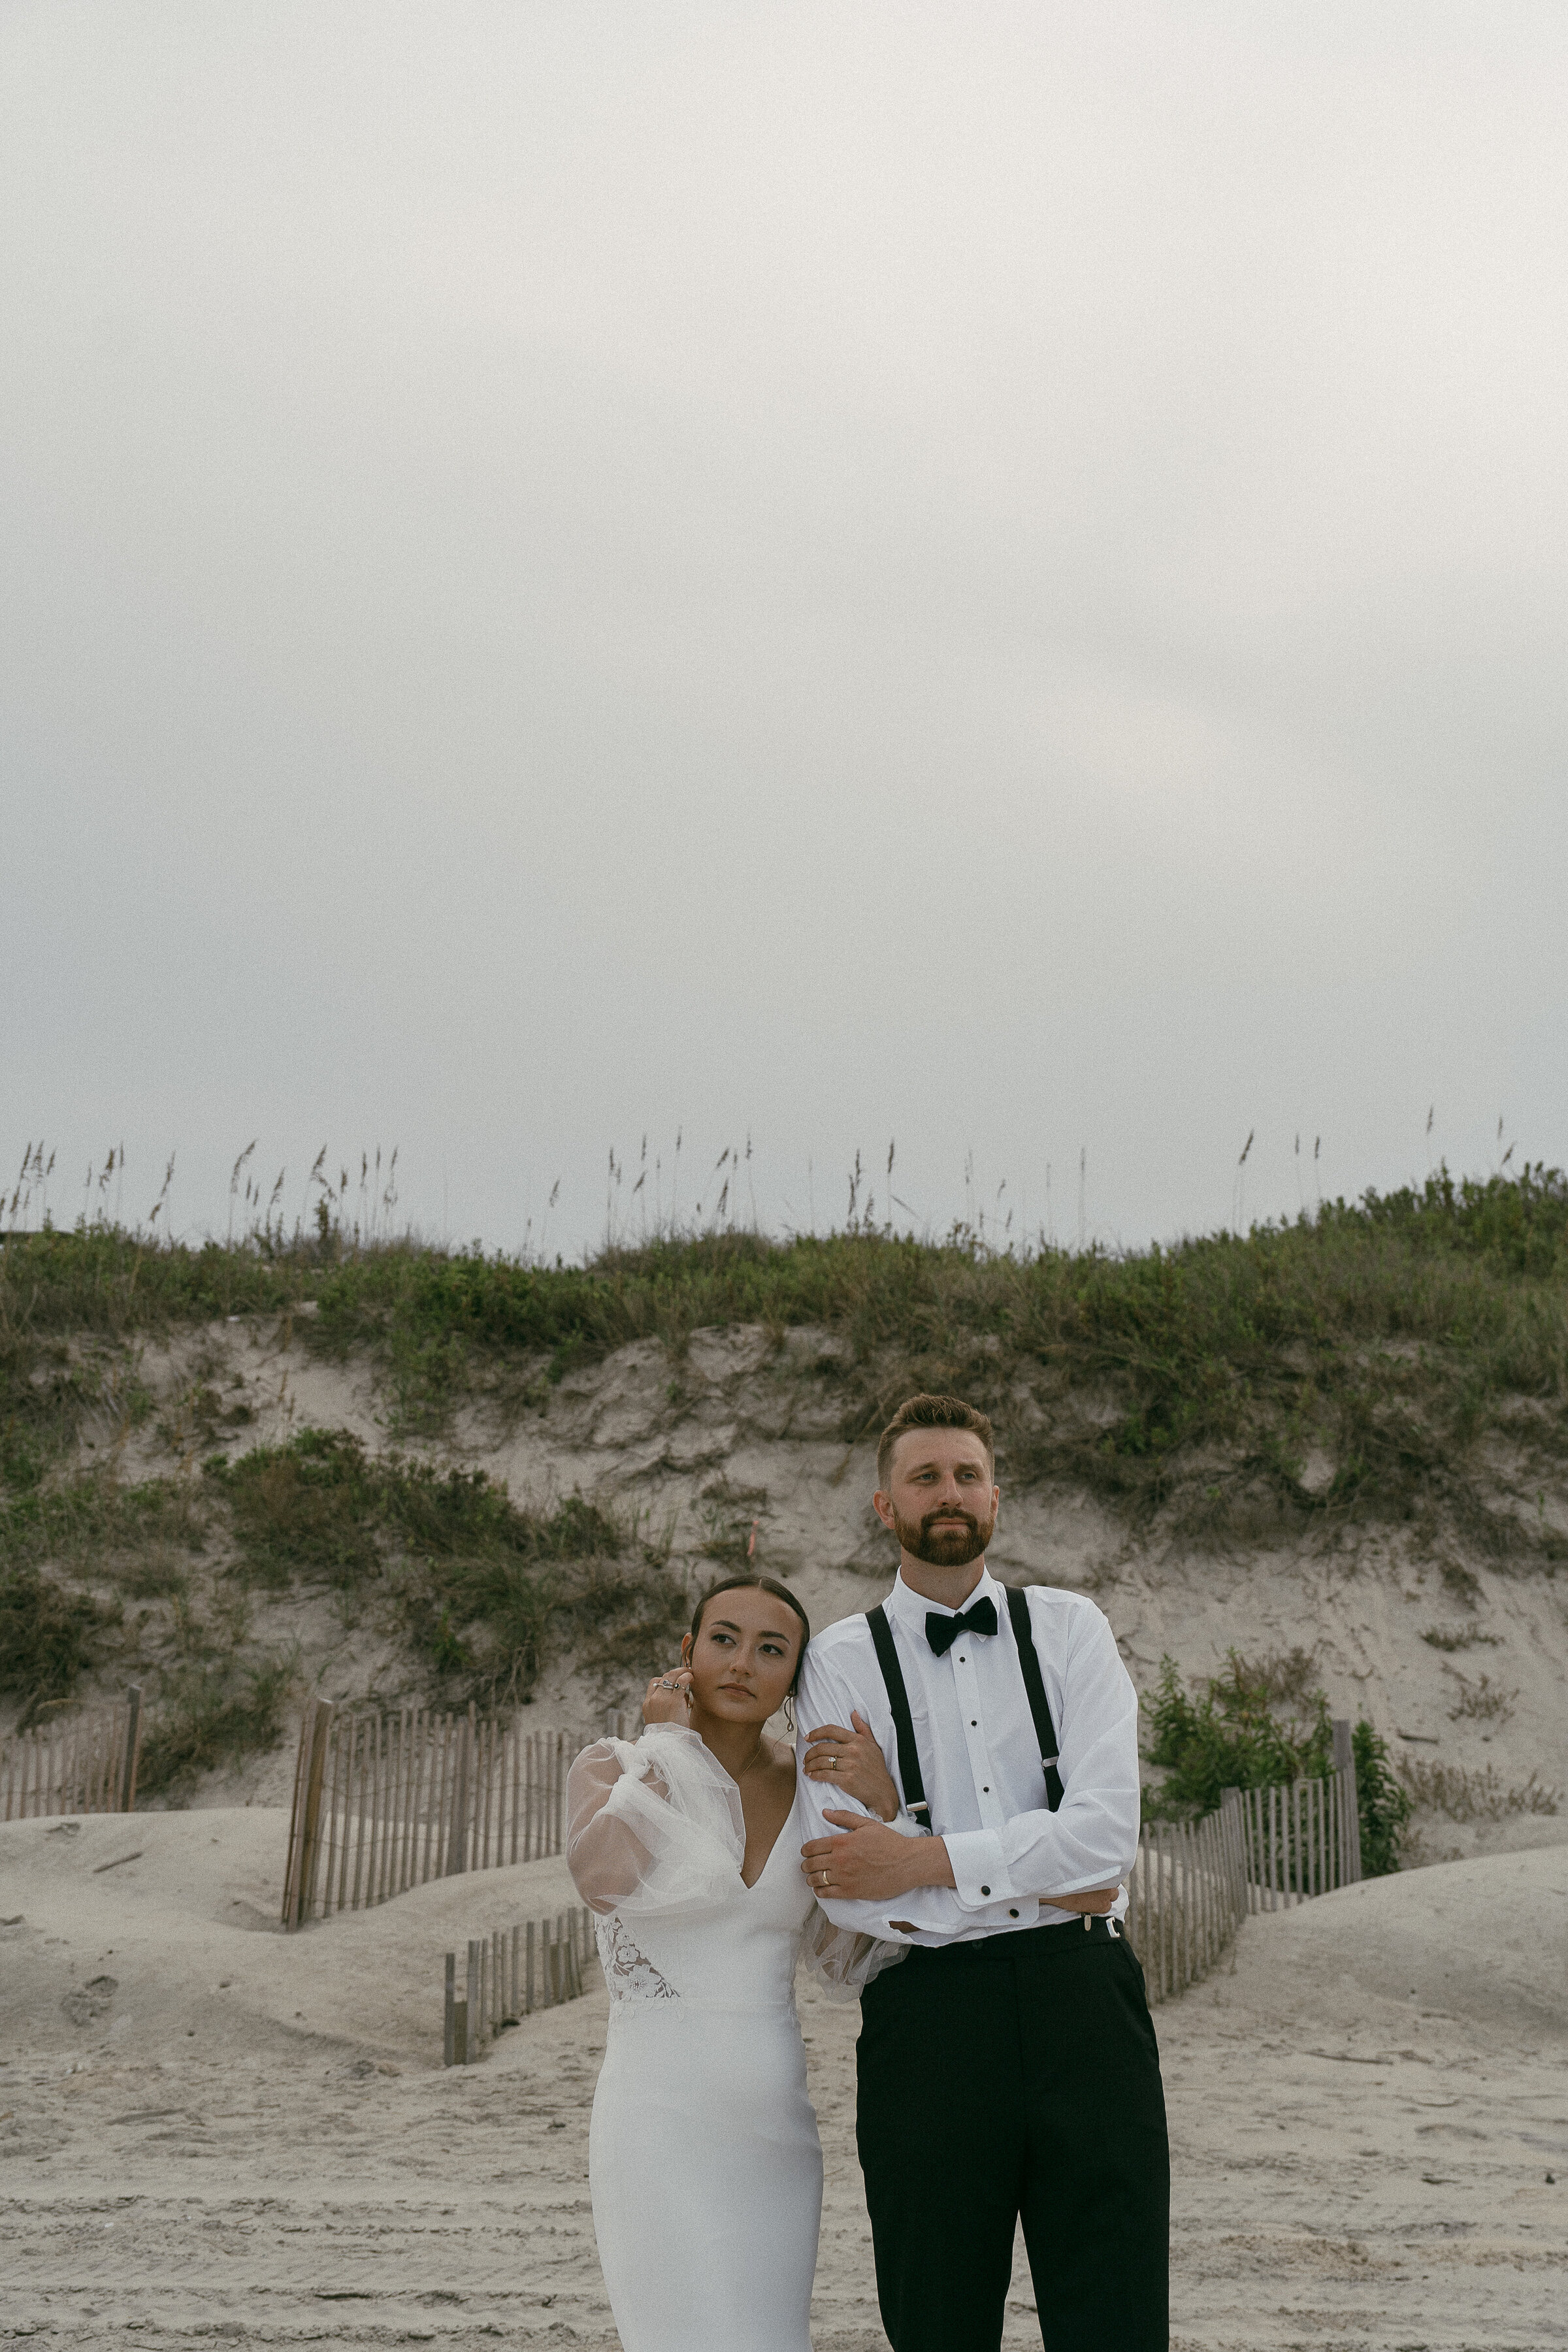 Bride and groom standing solemnly on the beach, with dunes in the background.